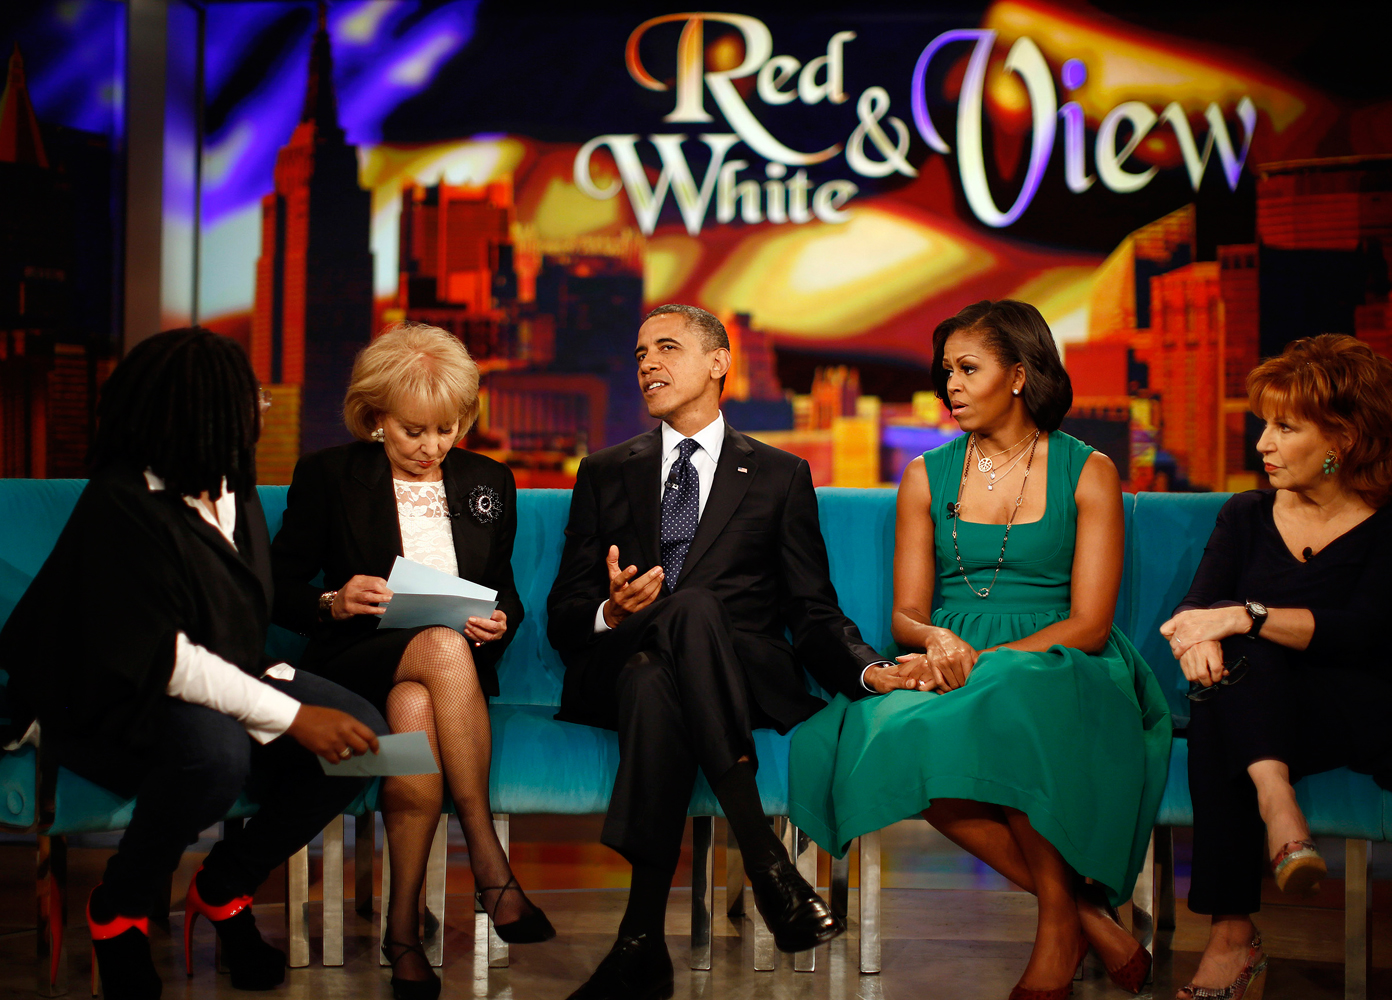 U.S. President Barack Obama and first lady Michelle Obama take part in a taping of the "The View" chat show at ABC's studios in New York, Sept. 24, 2012.